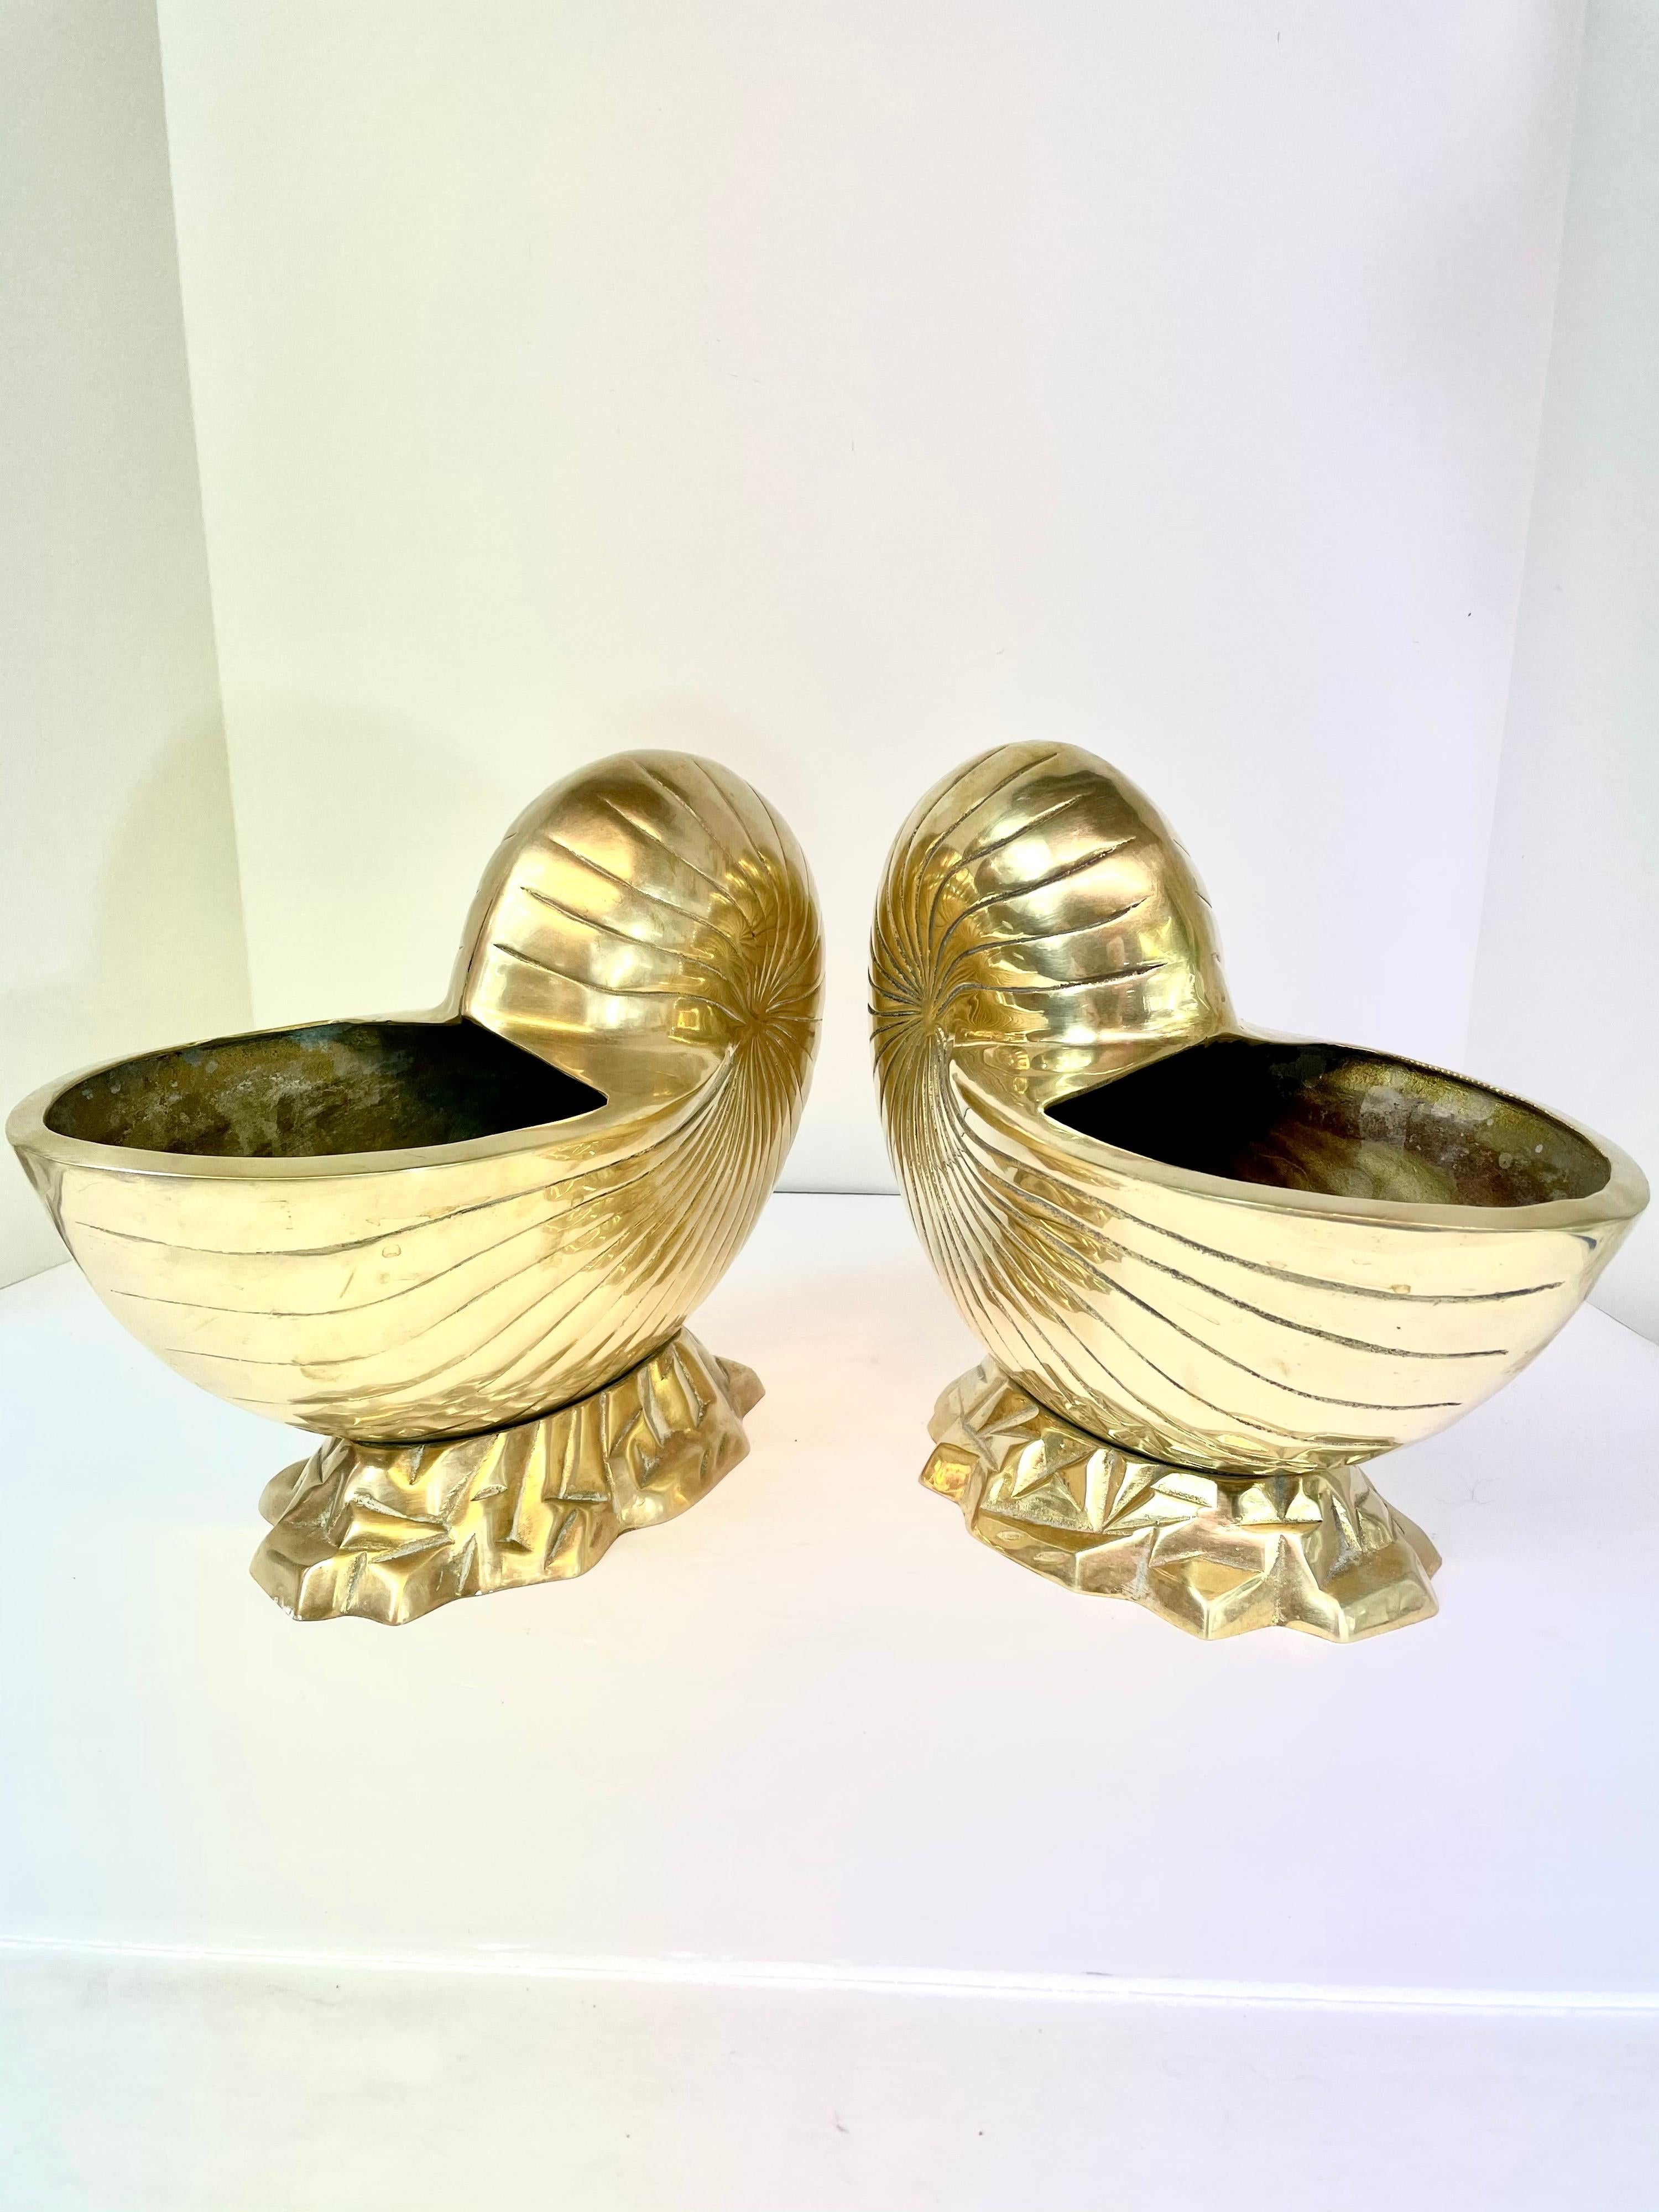 Large brass nautilus from the 1970s n a hand polished finish, circa 1970s. Made in Korea. Both are same size, shape, and color.